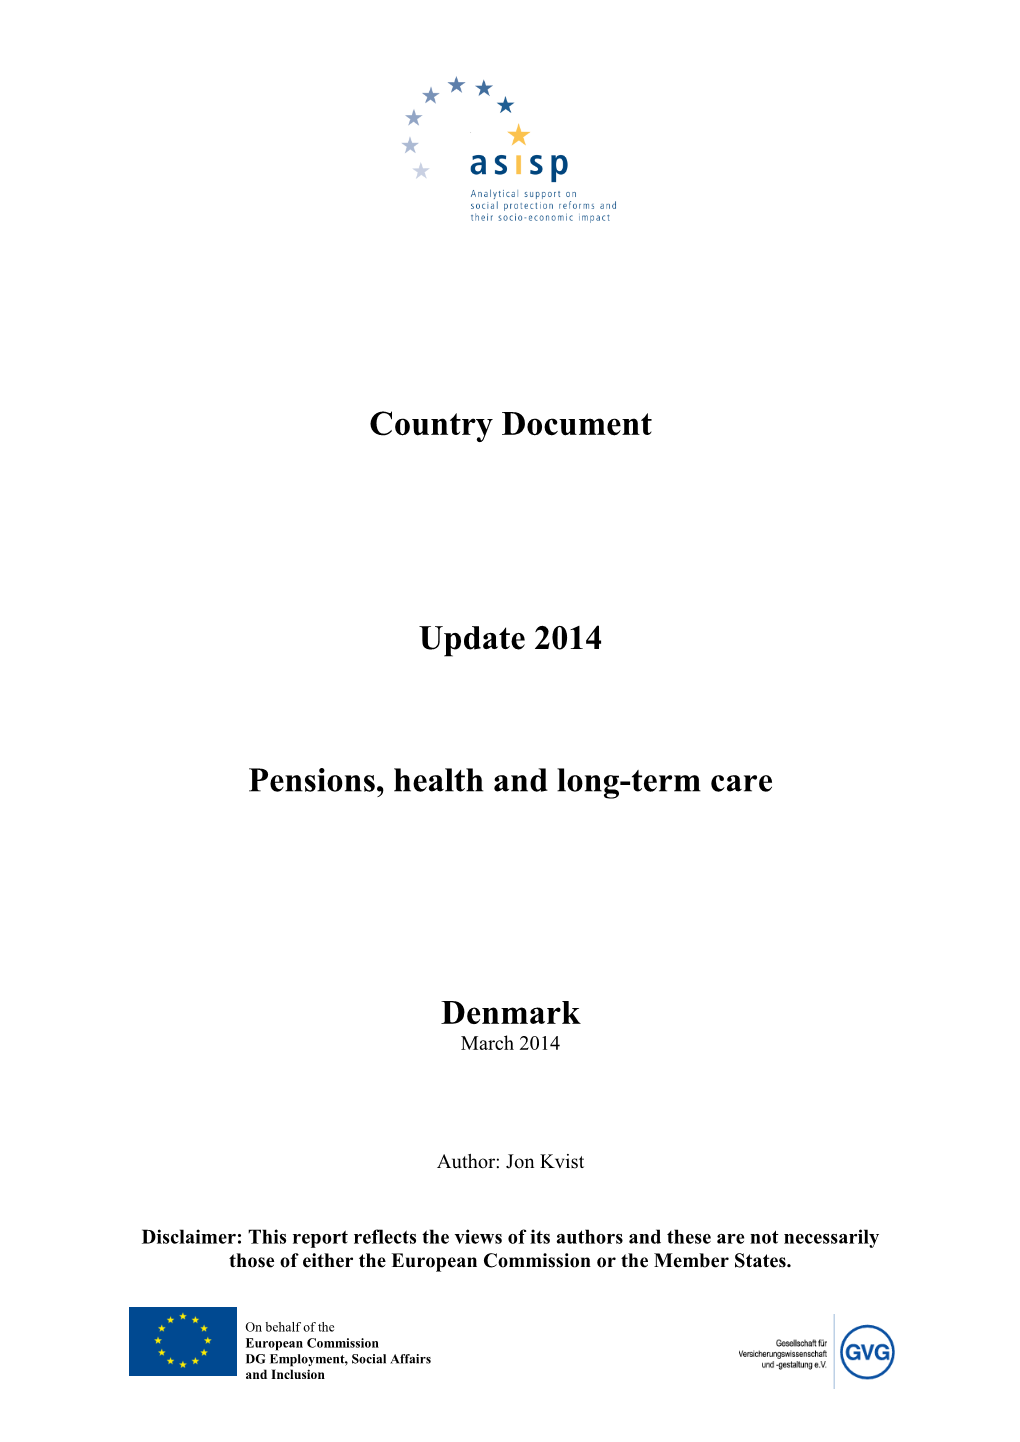 Country Document Update 2014 Pensions, Health and Long-Term